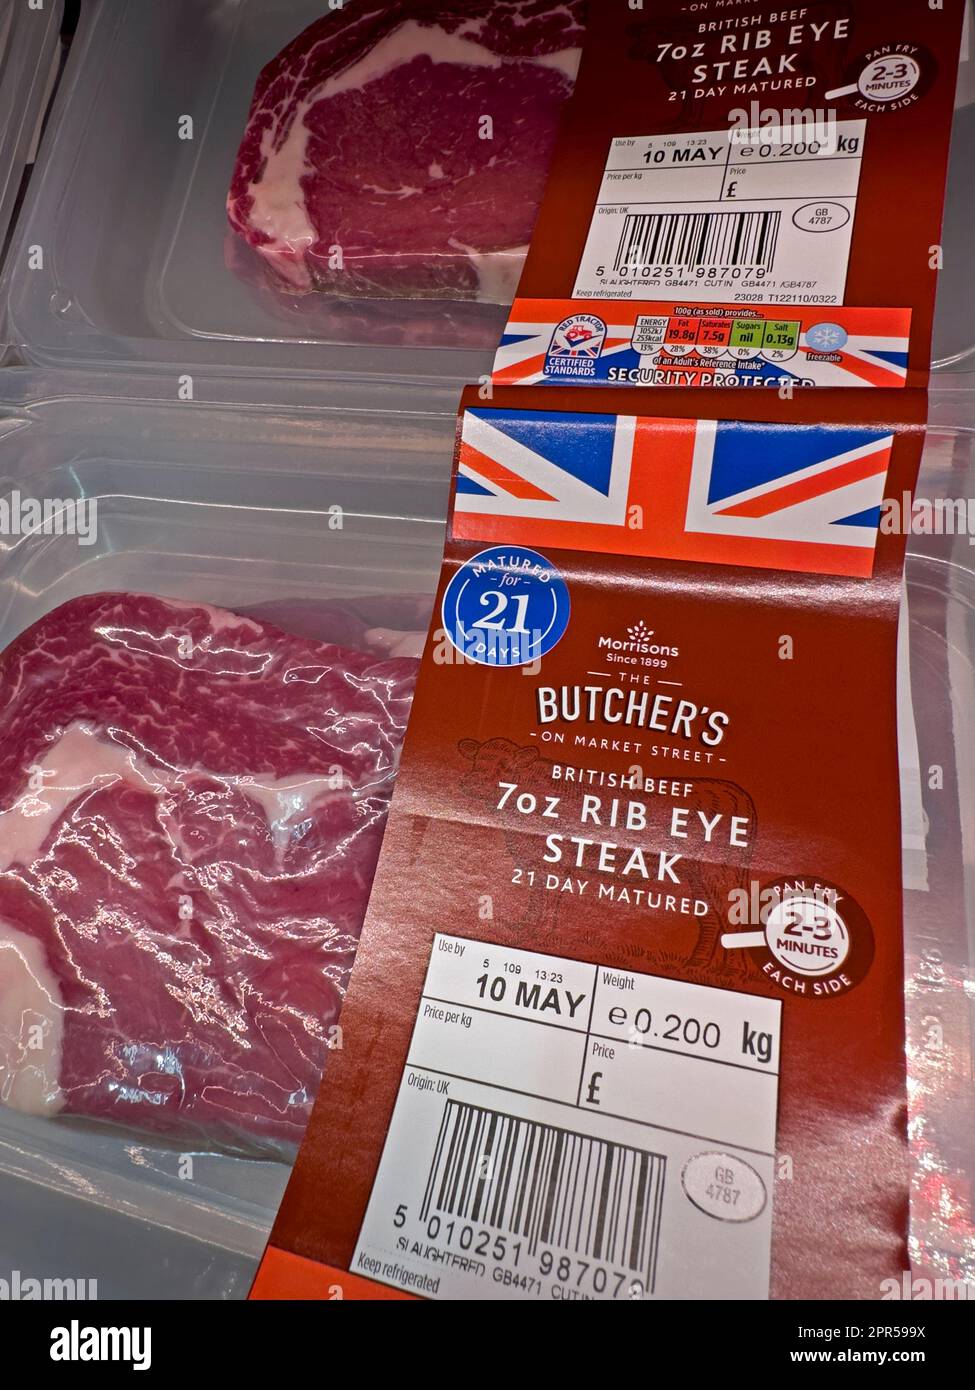 Beef red meat - 7oz Rib eye steak at Morrisons supermarket, British food retailer competing with discounters, England, UK Stock Photo